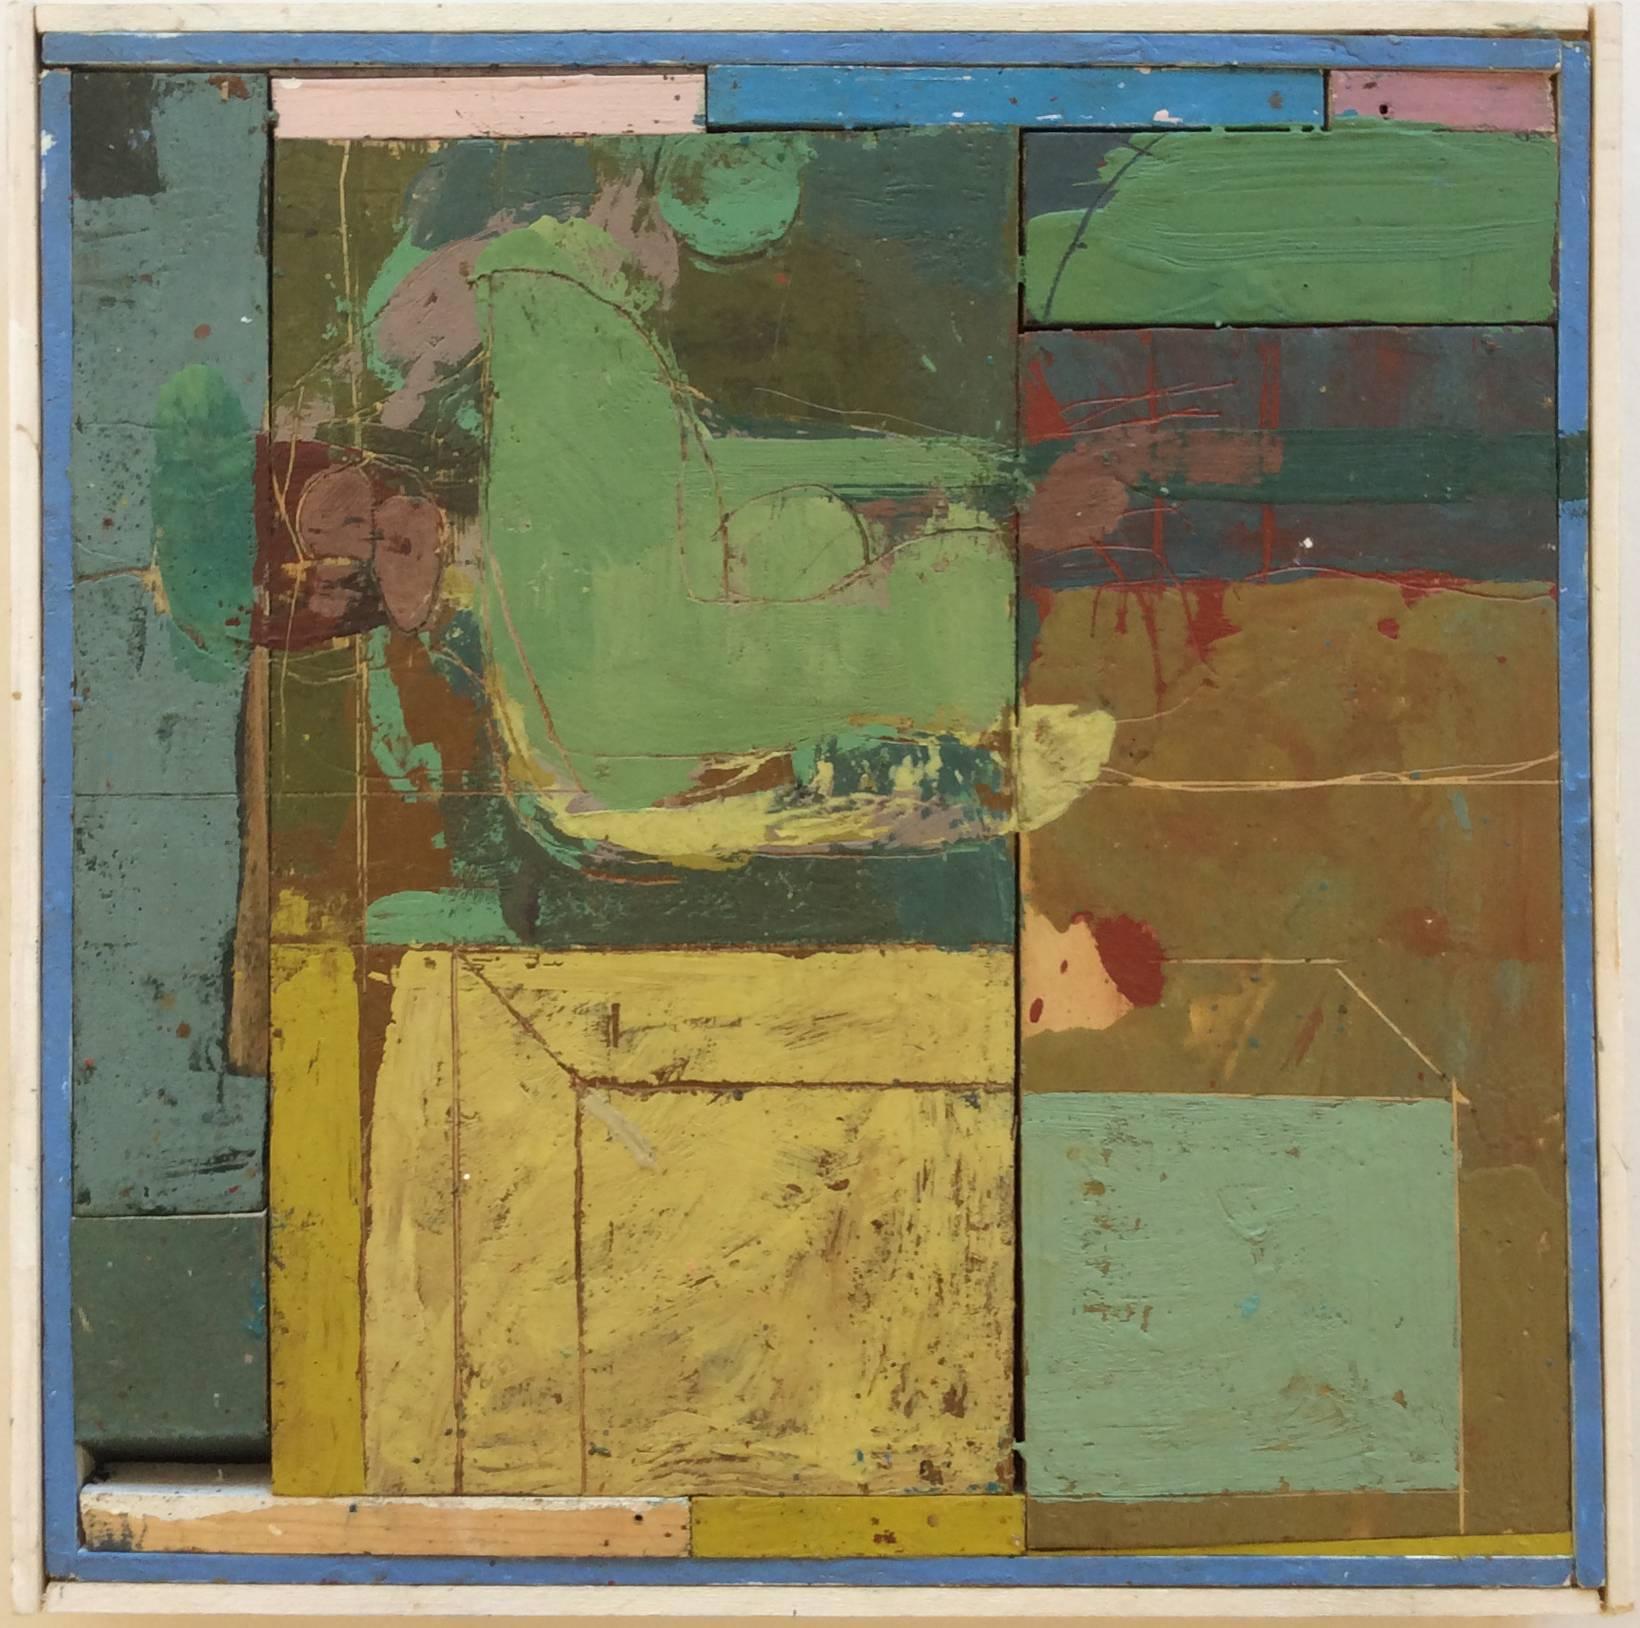 Backyard Pool (Square Abstract Encaustic Painting on Wood Panel in Earth Tones) - Mixed Media Art by James O'Shea